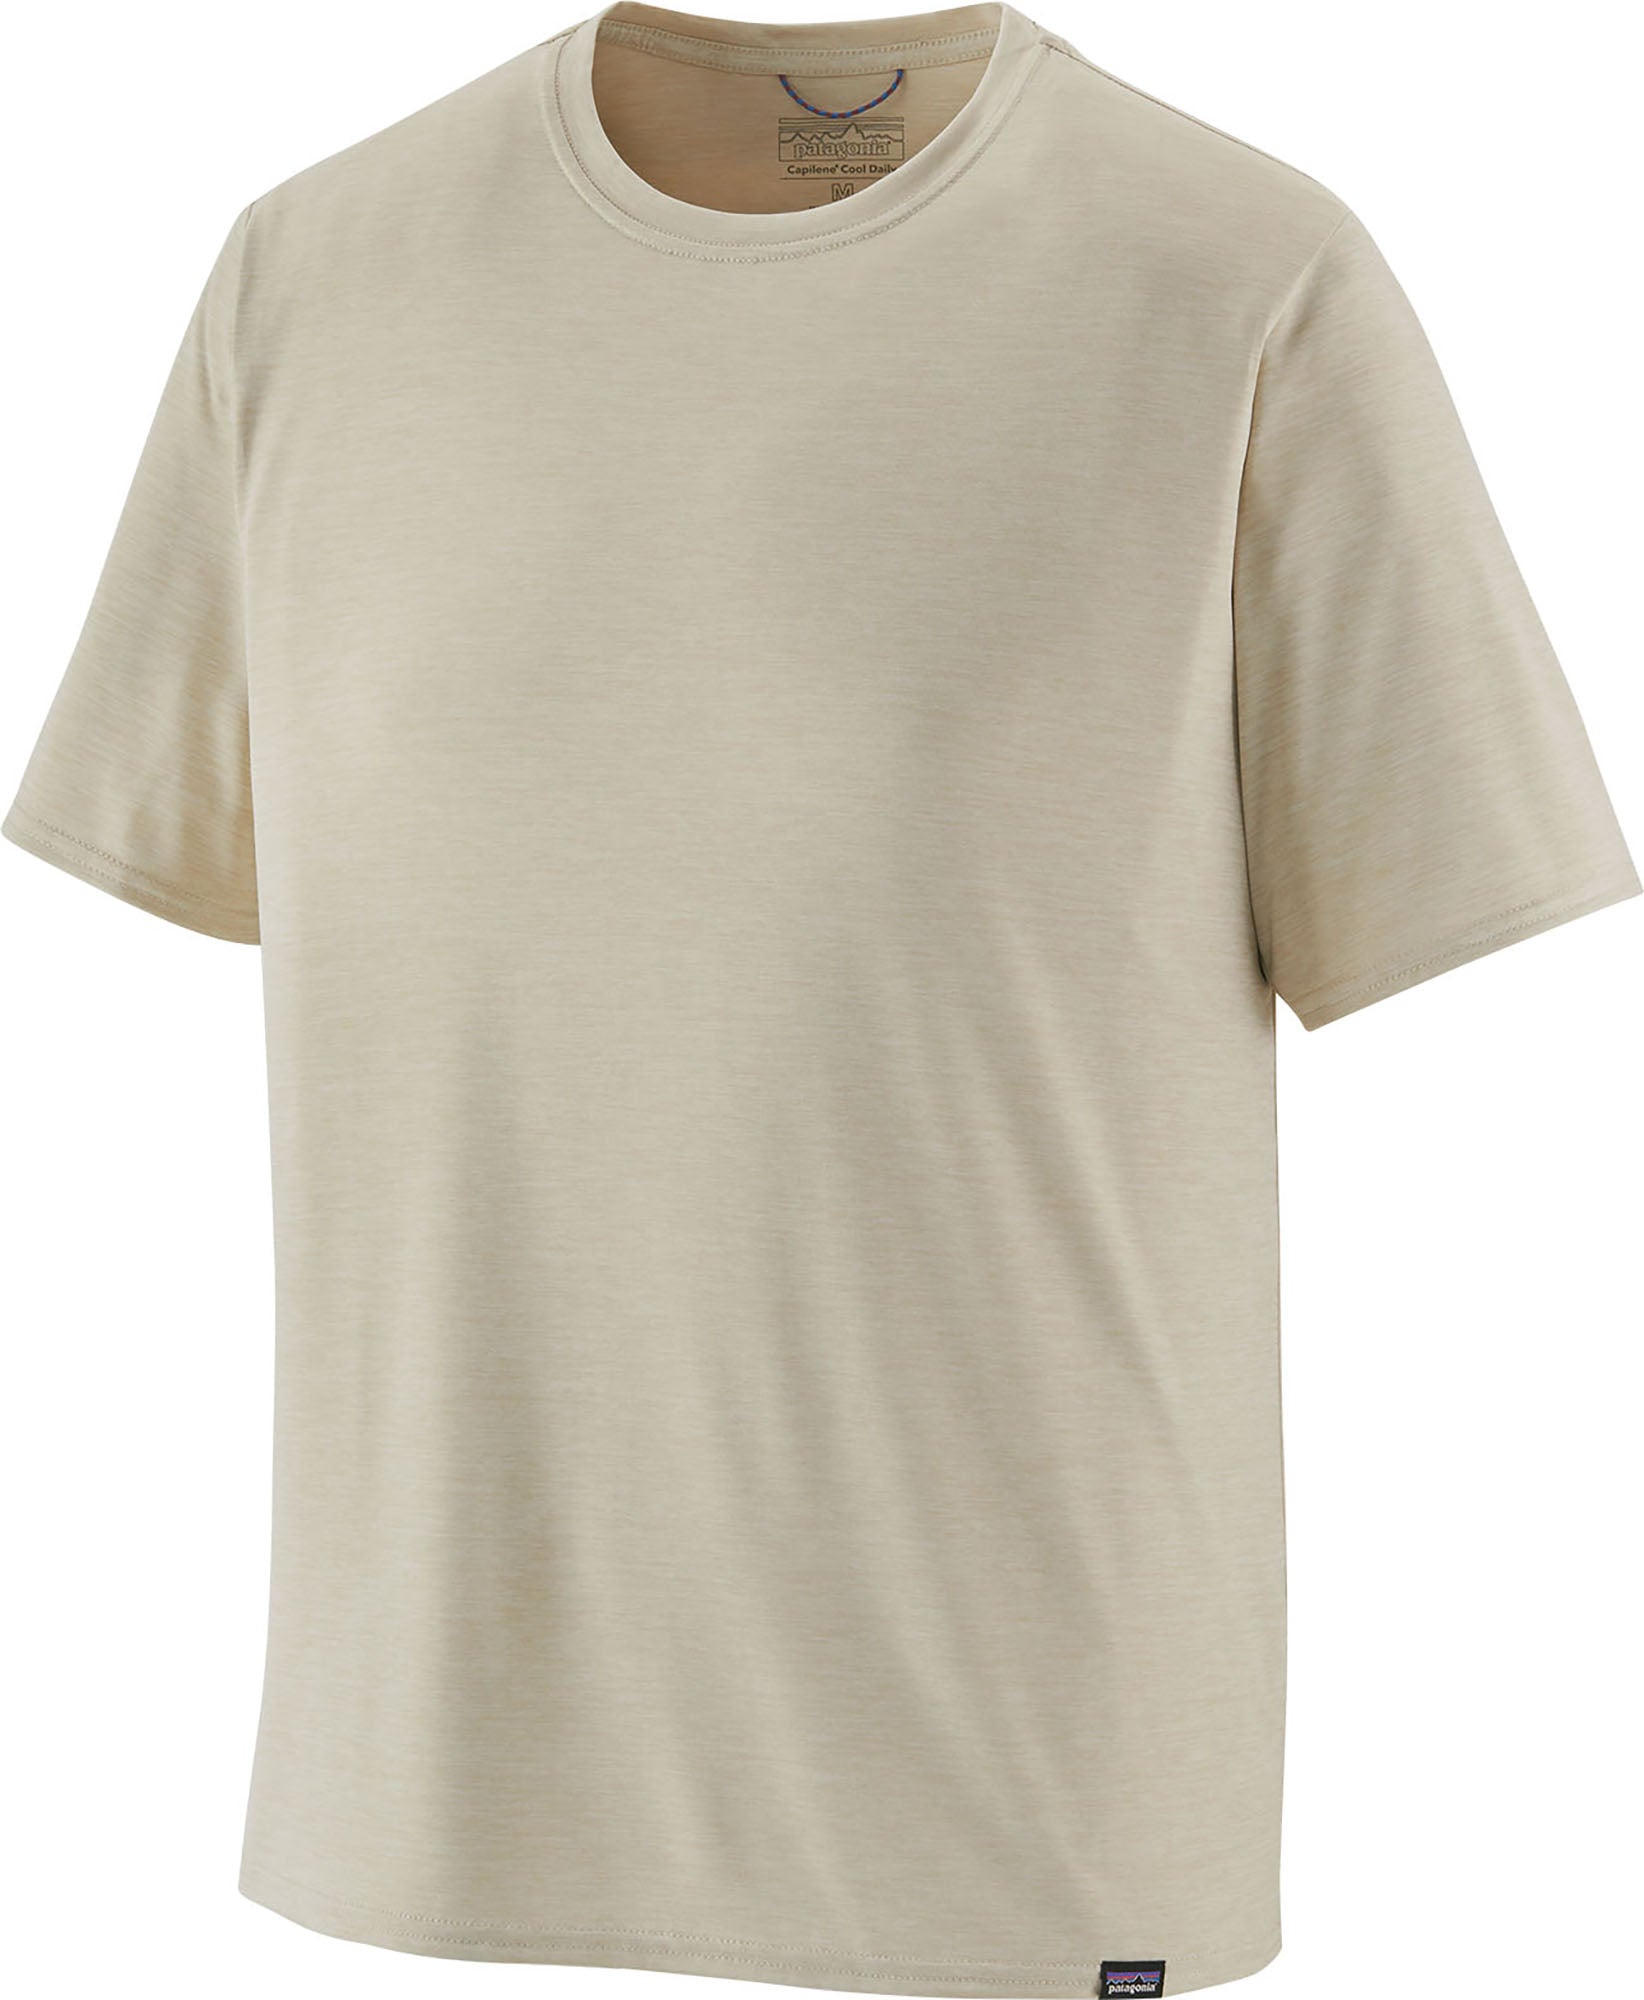 Go-Dry Cool Odor-Control Base Layer T-Shirt for Men